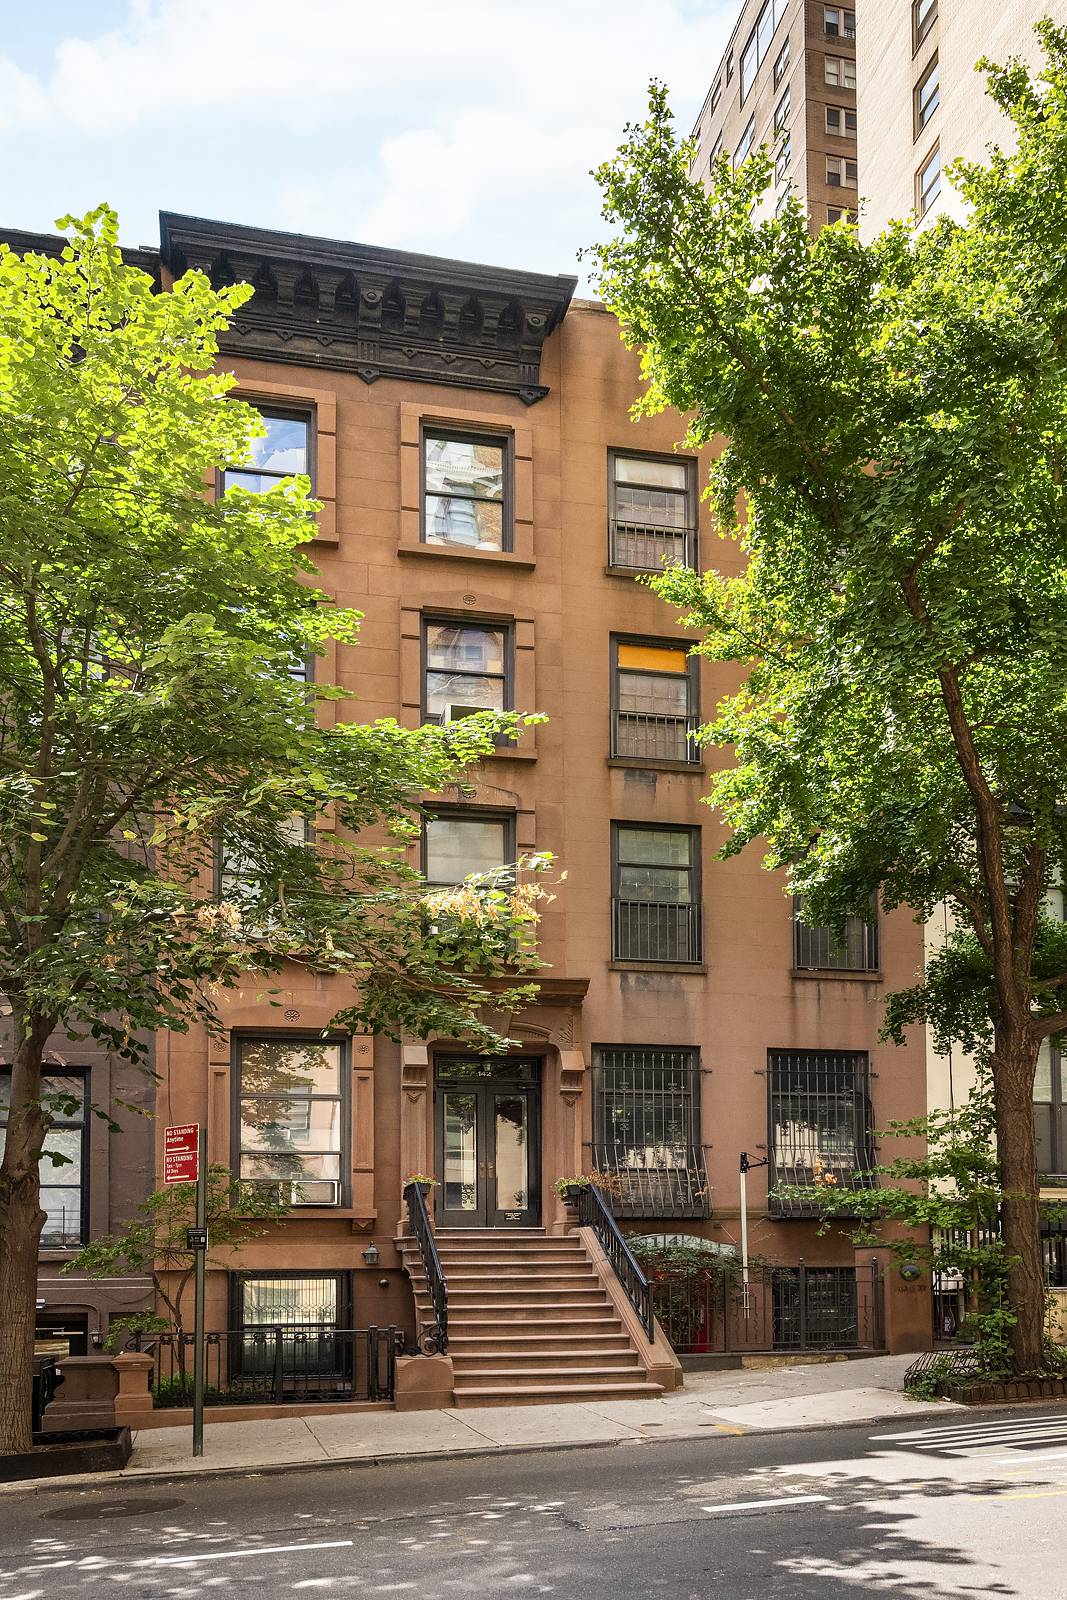 140 East 37th Street is a beautiful and historic single family home in the heart of Murray Hill.